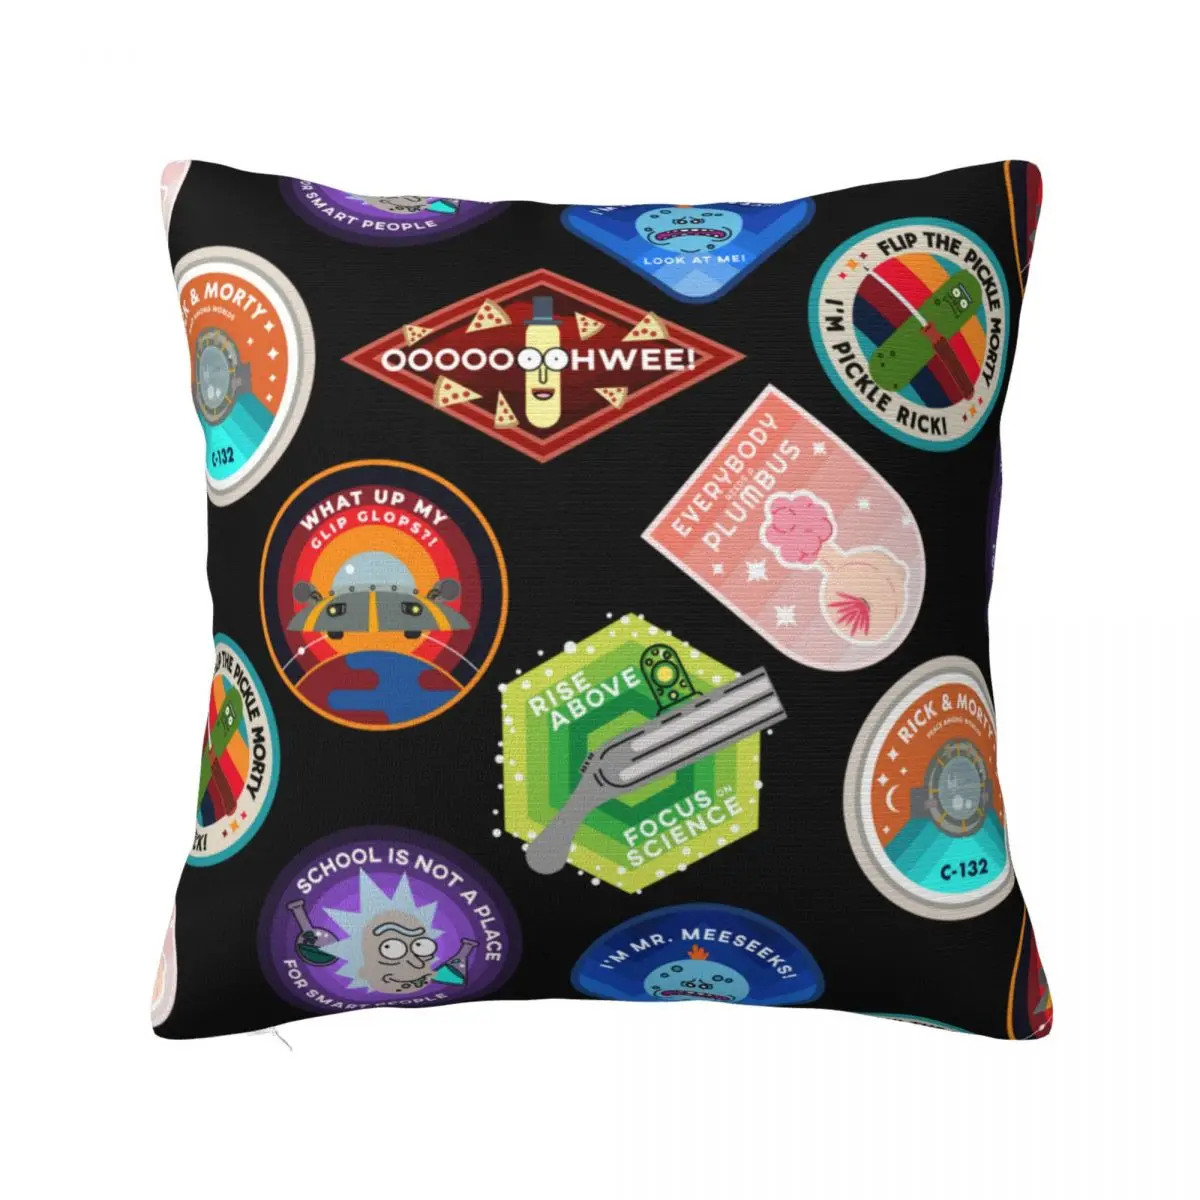 

Rick Outer Space Patches Pillowcase Printing Cushion Cover Decoration Cartoon Animation Throw Pillow Case Cover Home Square 18"